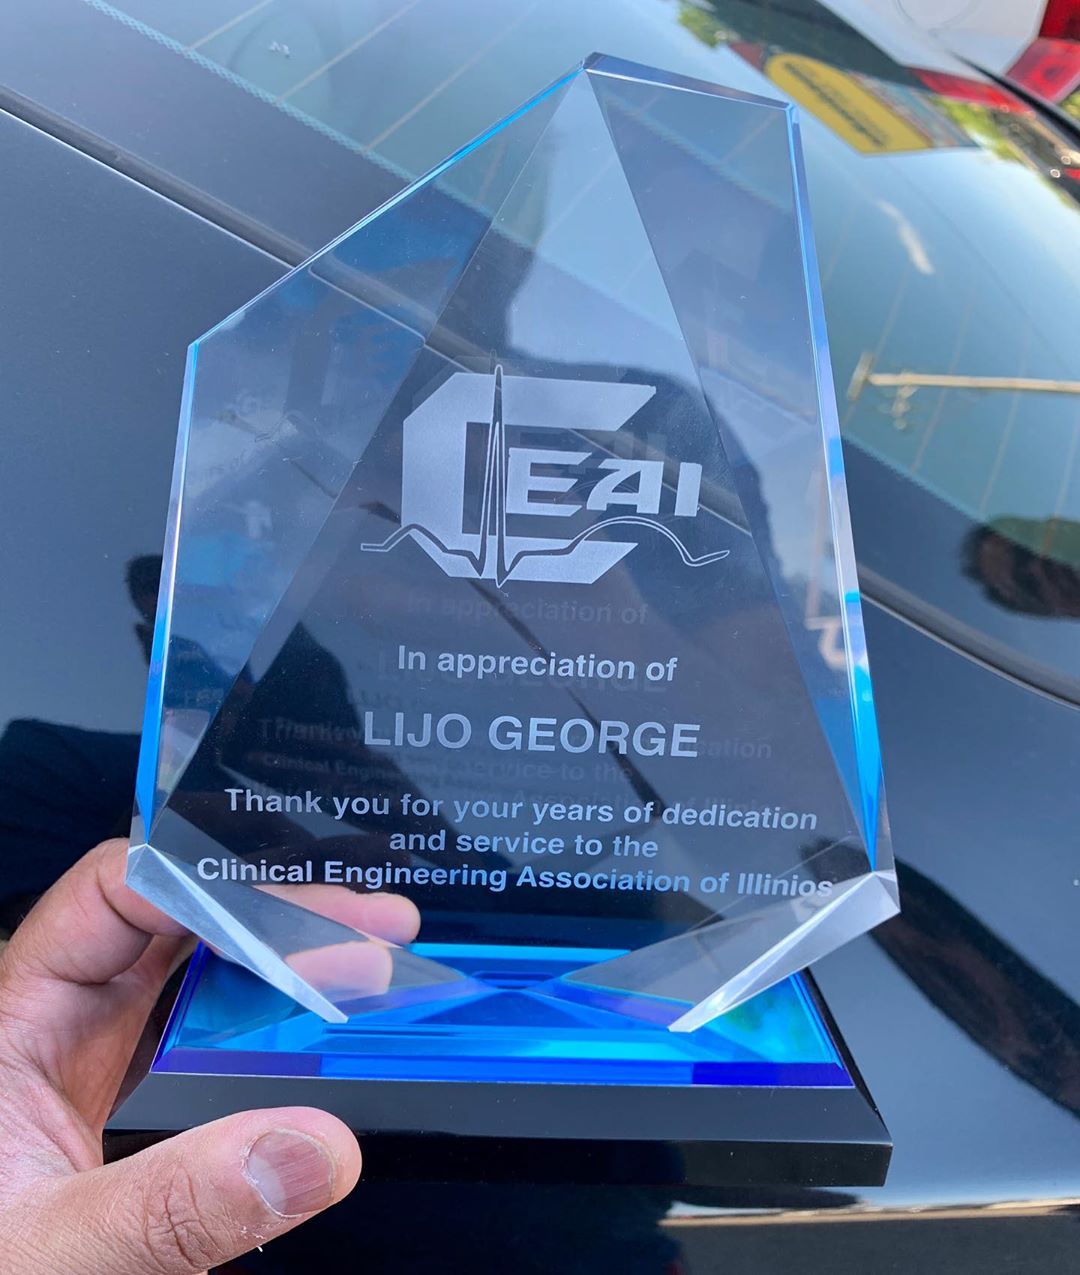 I am happy to say that I worked along side of some of HTM’s world class leaders Al Moretti, Gary Barkov, Steve Vanderzee, Suraj, Joe Bandra, Jose Nunez, Nikki Malloe. Huge thanks to Al Moretti for brining me into CEAI leadership since 2009 and in the past 2 years  as a VP. I can’t believe 10 years have passed. I can say CEAI is stronger and making a huge impact in the HTM community. #IamHTM #CEAI #Mission #AAMI 
CEAI is for everyone who works in healthcare technology management. No matter where you are in your carrier: a seasoned professional, student, or new to the HTM community. Learn from industry experts and thought leaders who will discuss every major issue facing the field. Network with other and sharing best practices to improve patient safety and control costs.

CEAI mission is to promote corporation education, formal/informal exchanges of ideas and technical information related to clinical engineering to assure better patient care and reliable maintenance operation and application of clinical equipment. #HTM #BiomedicalEngineers